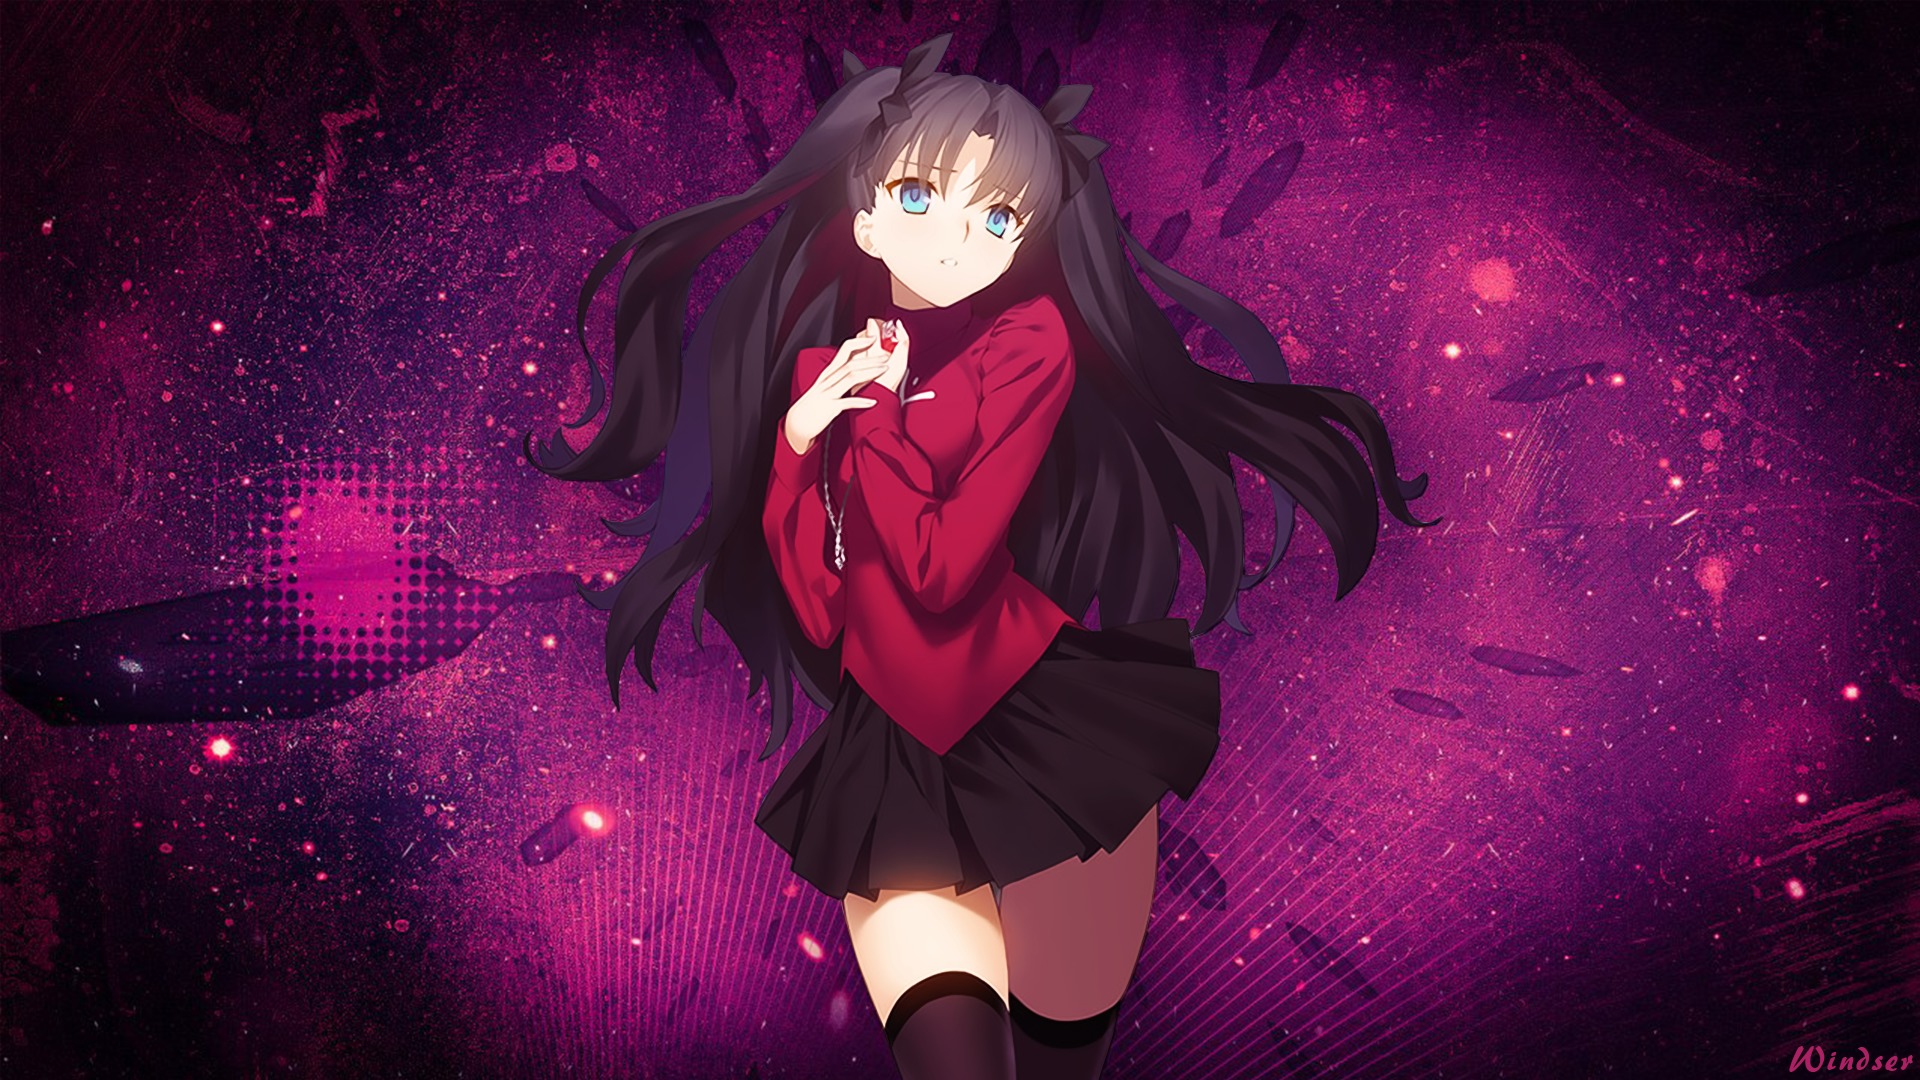 Rin Tohsaka Fate Stay Night Unlimited Blade Works Wallpaper Hd Anime 4k Wallpapers Images Photos And Background Wallpapers Den